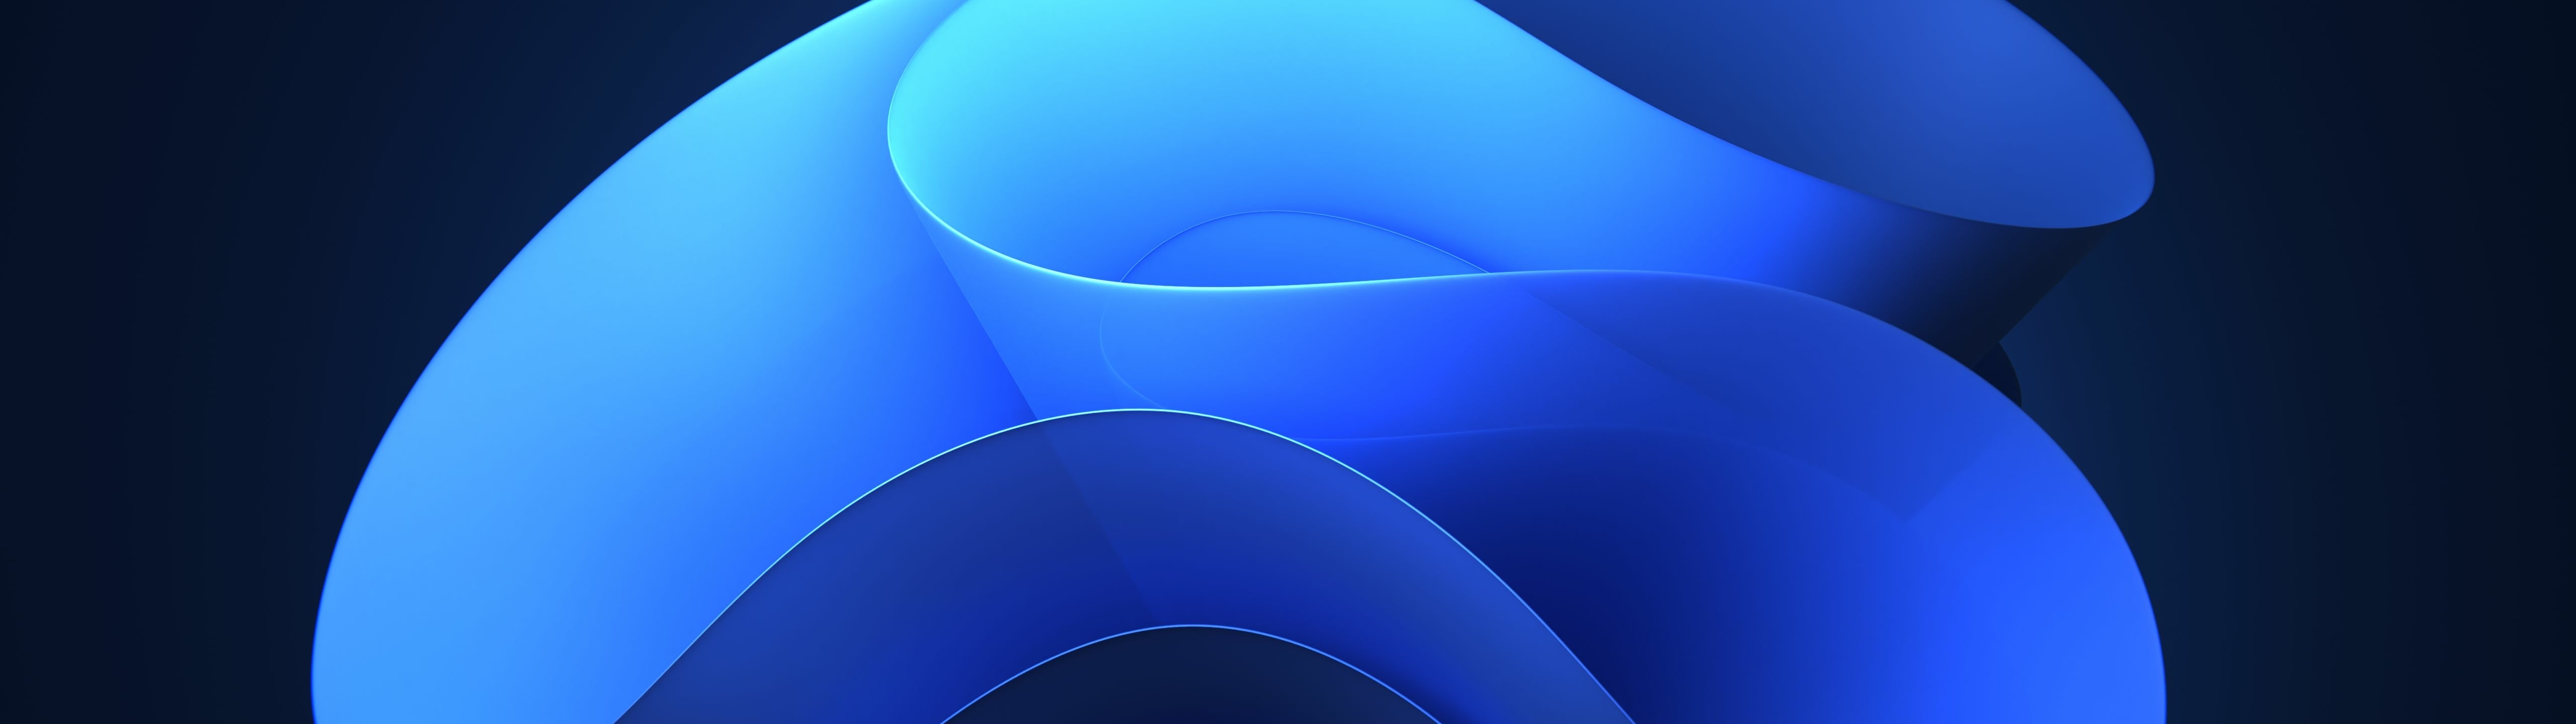 Windows 11 Official Wallpaper 4k Aesthetic Imagesee